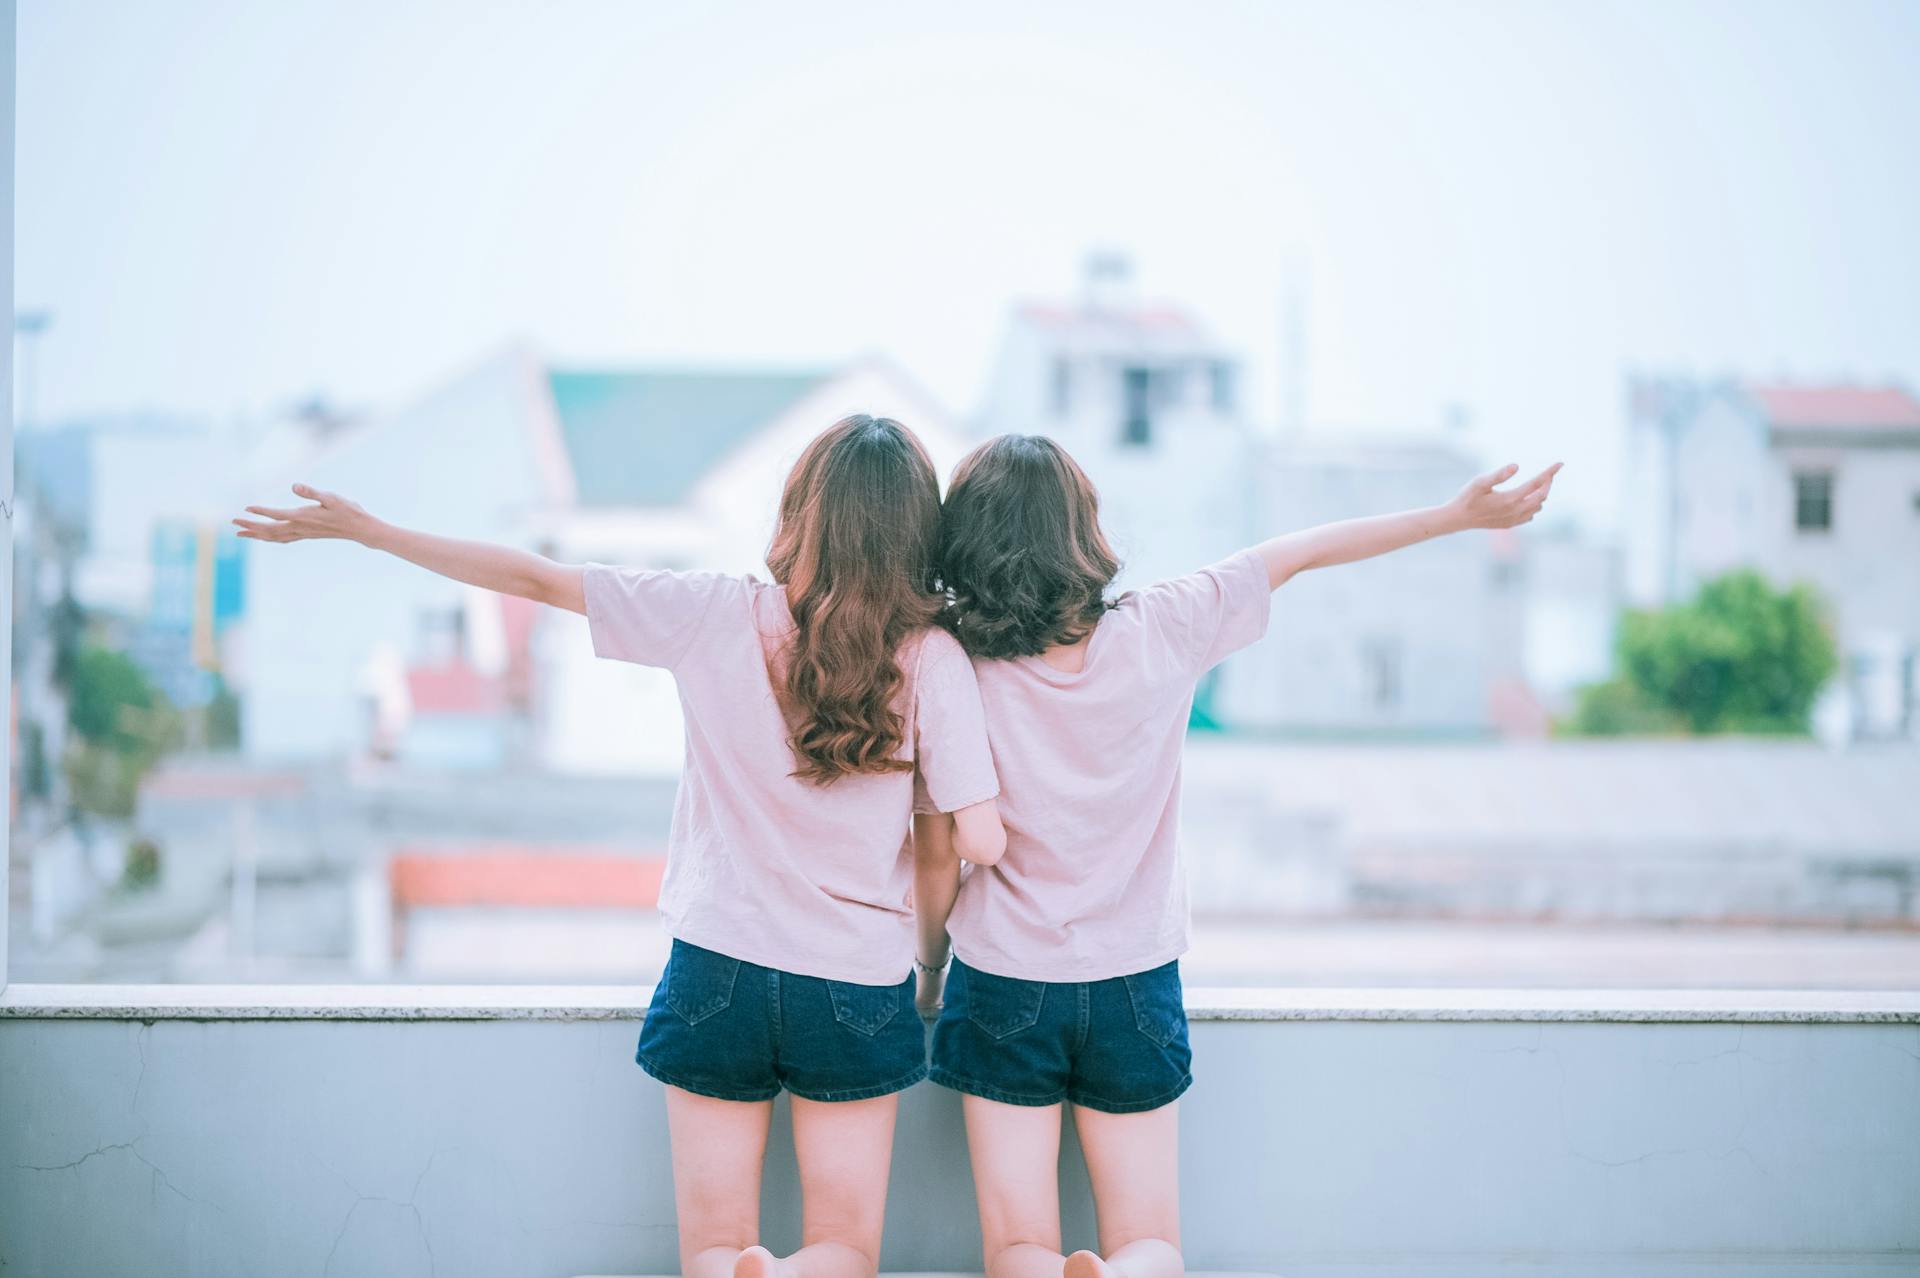 Two women wearing matching clothes on a balcony | Source: Pexels